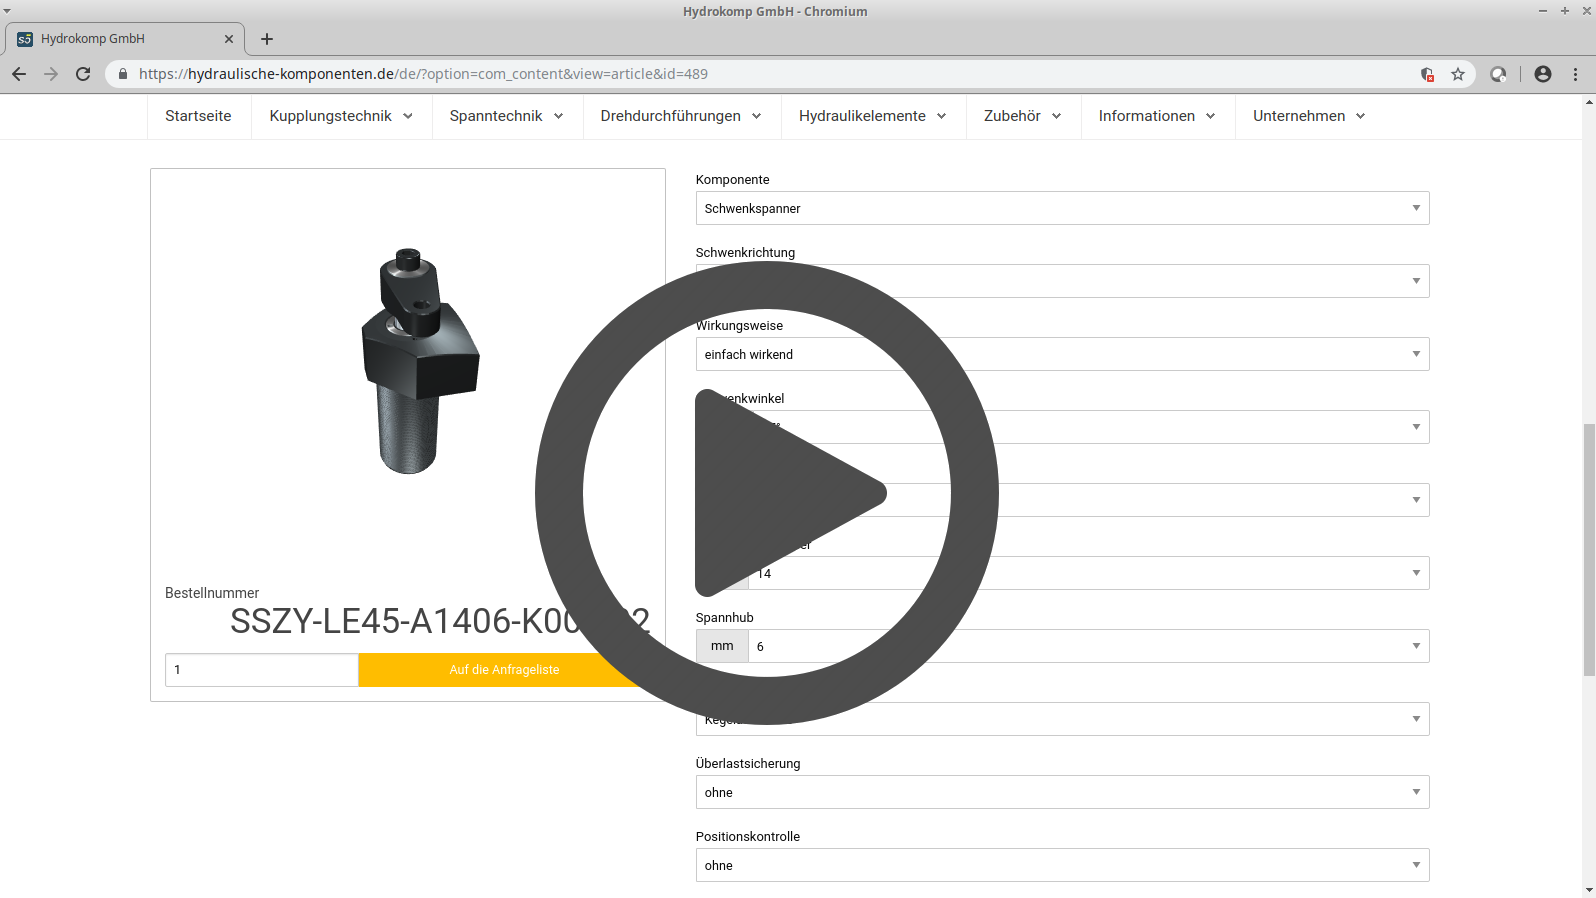 Video of 3D product configuration using the example of hydraulic components